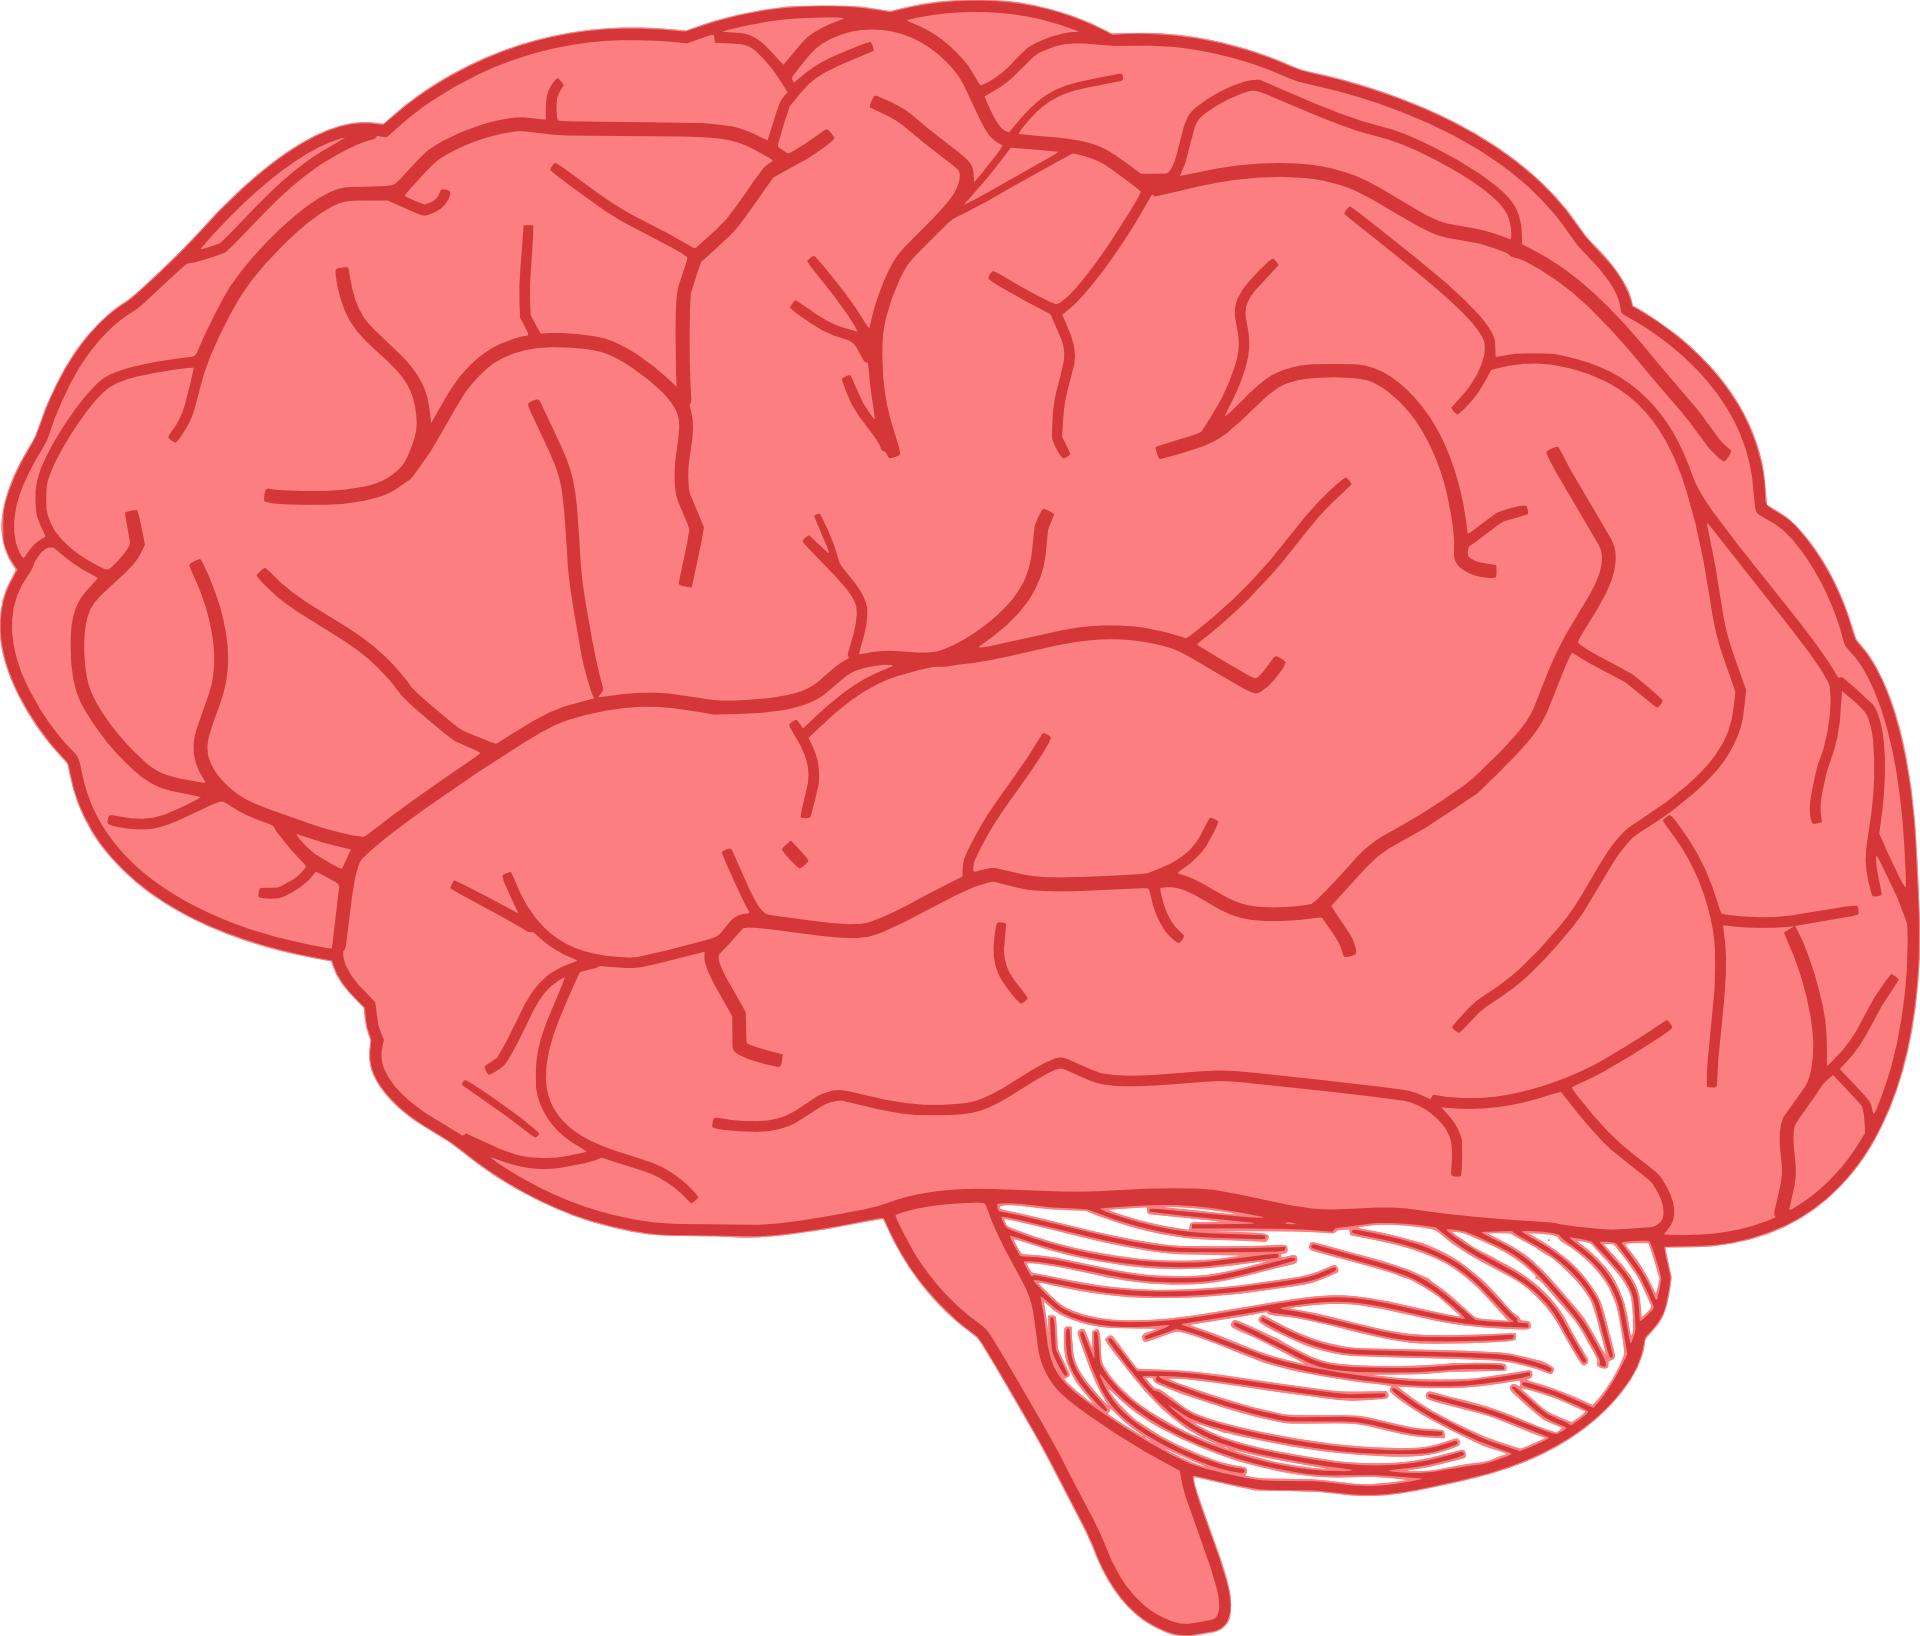 Drawing of a human brain anatomy free image download